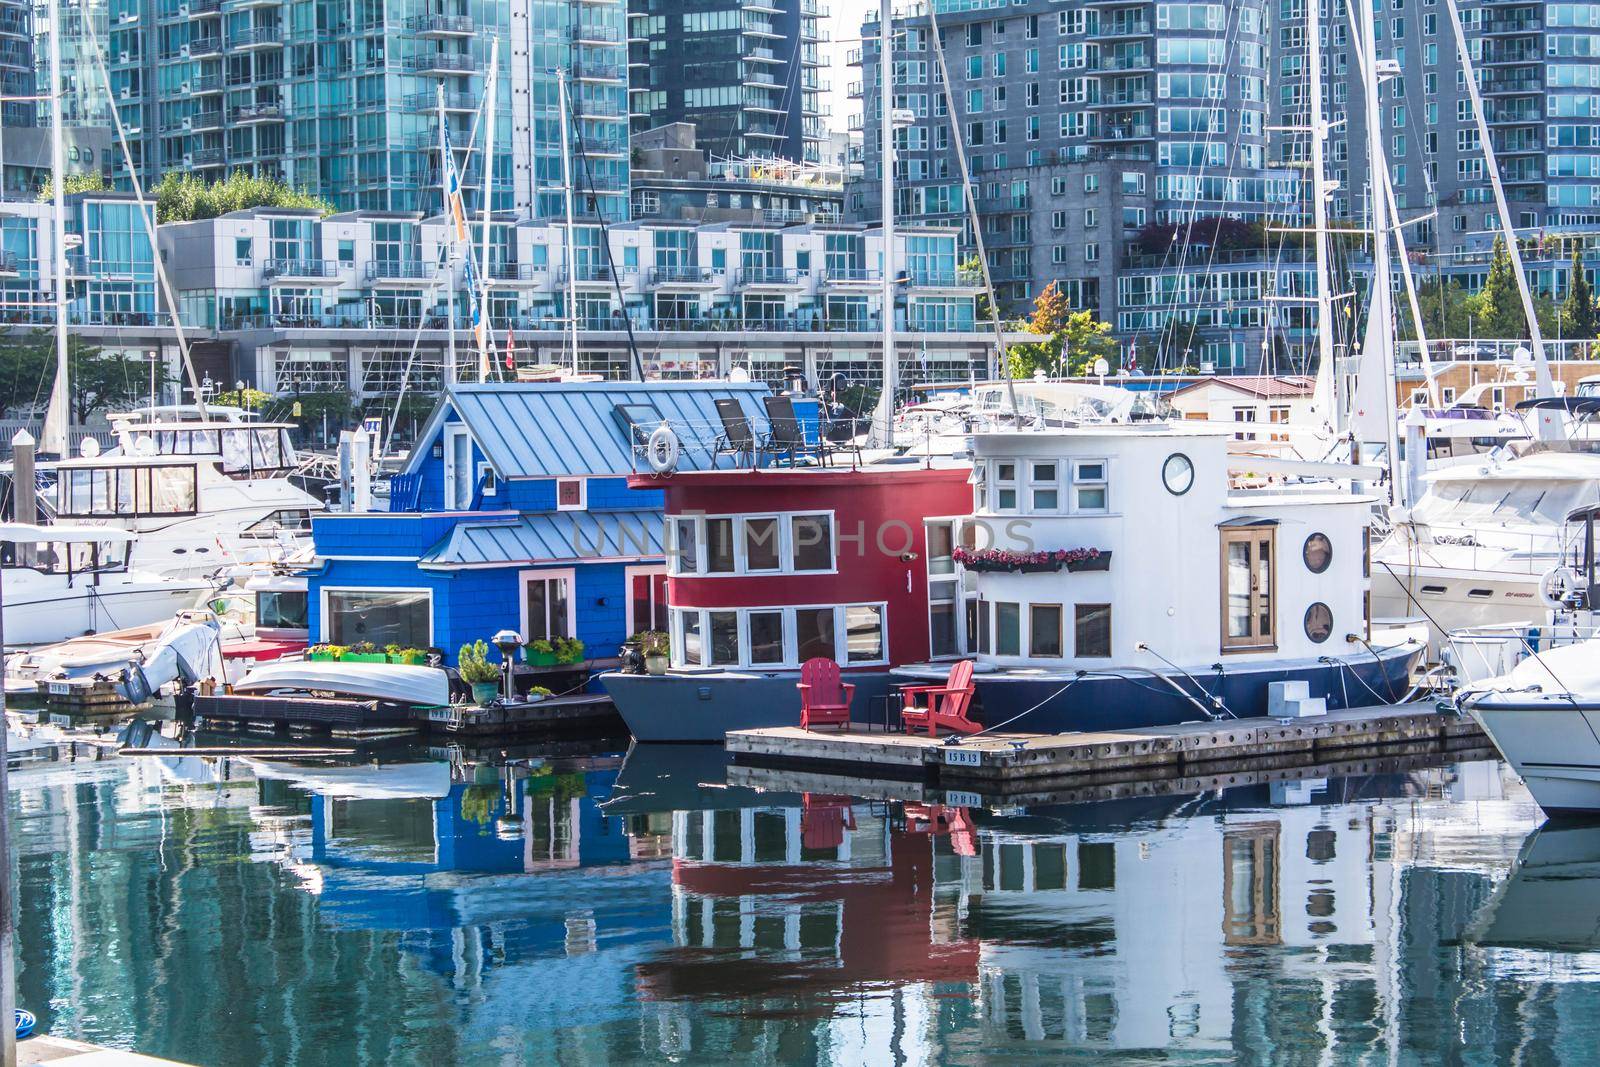 Vancouver, Canada - Septembre 2, 2020: Houseboats docked in the marina at the Coal Harbour waterfront